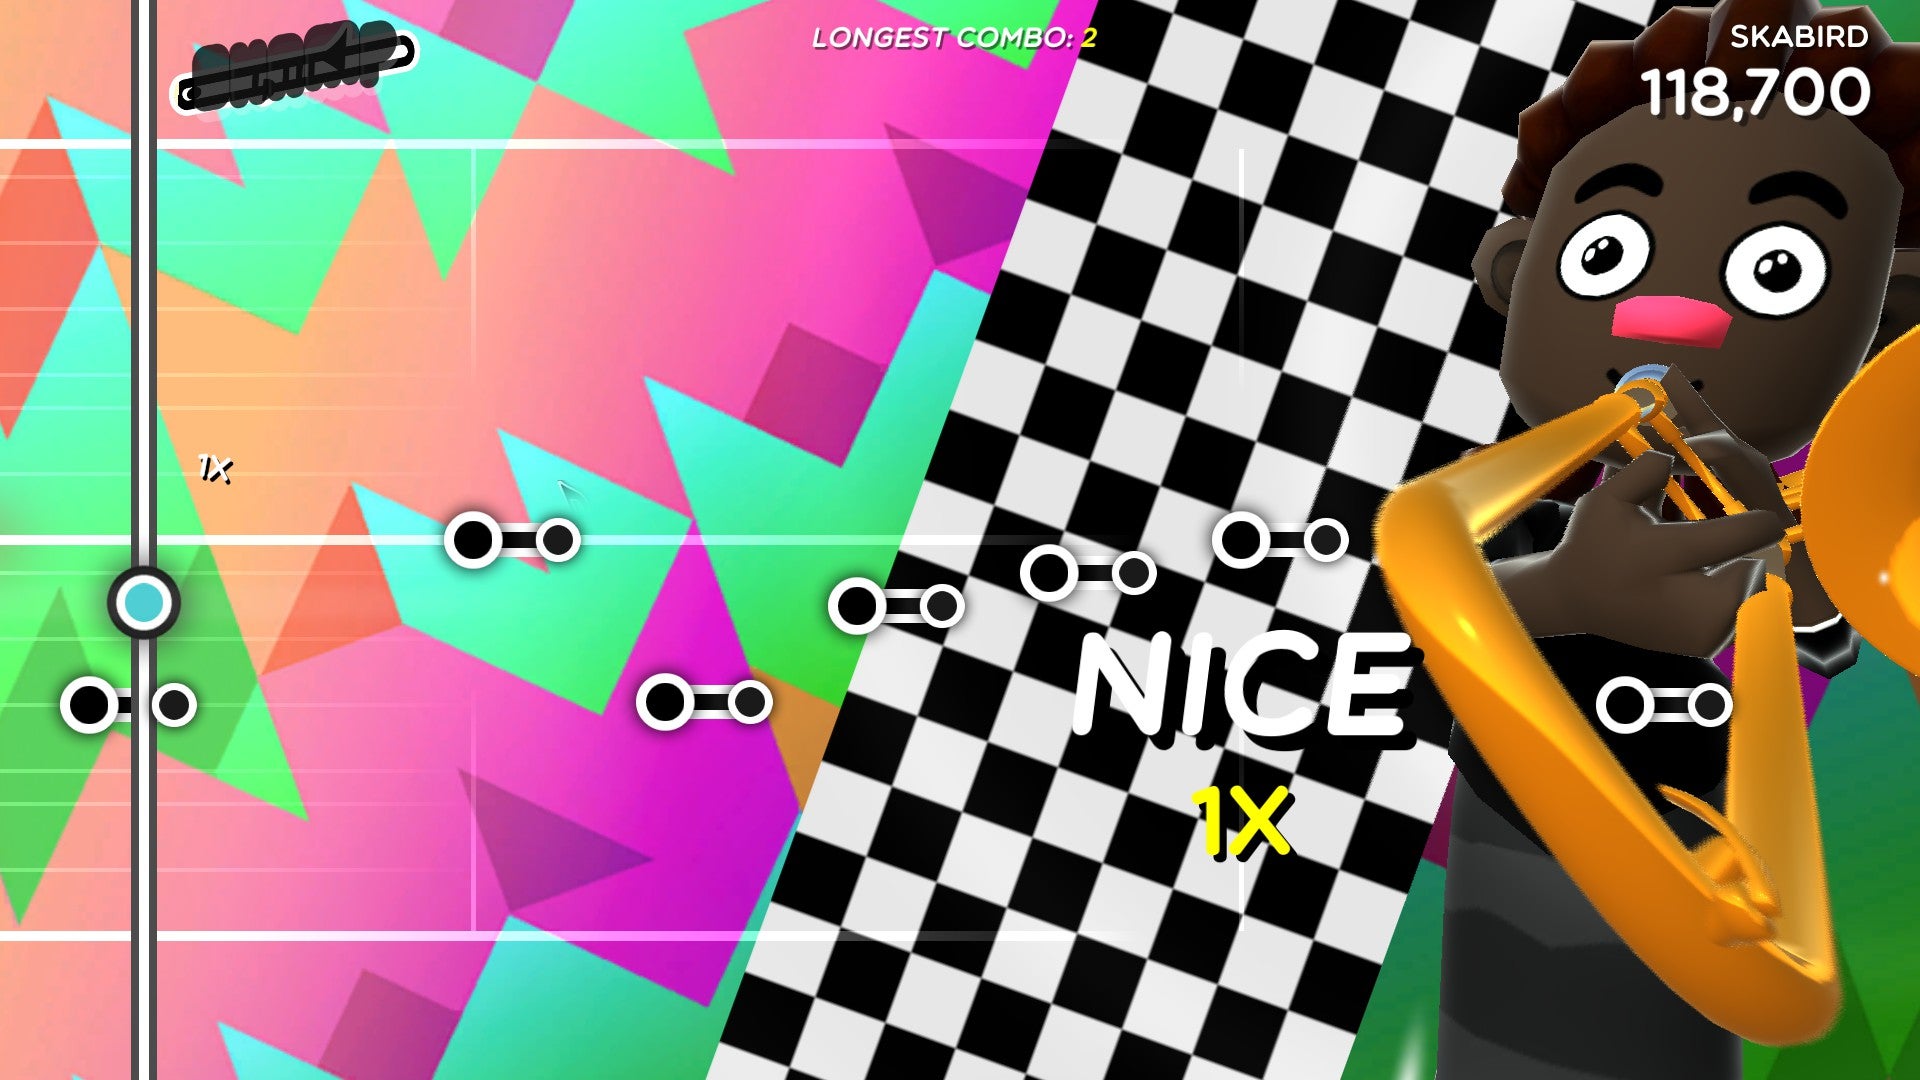 A cartoony man playing a trombone and facing the camera. It's a rhythm action game so notes are moving like tadpoles across the screen. There's a jazzy background because the song playing is Skabird. It's all neon pinks and greens.